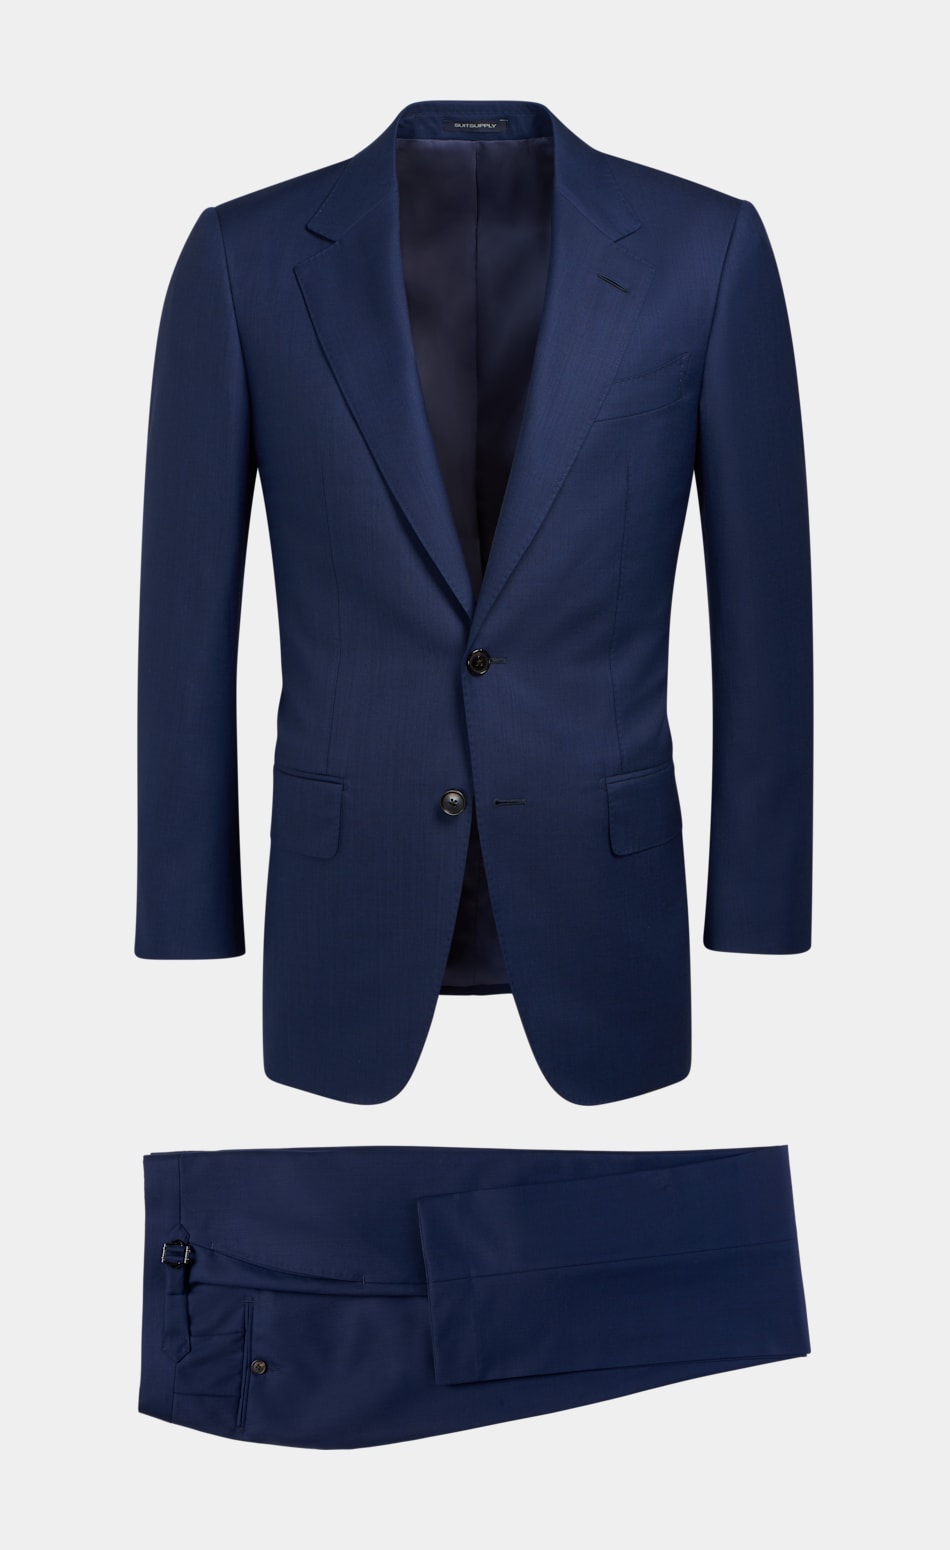 Navy Washington Suit | Pure Wool S150's Single Breasted | Suitsupply ...